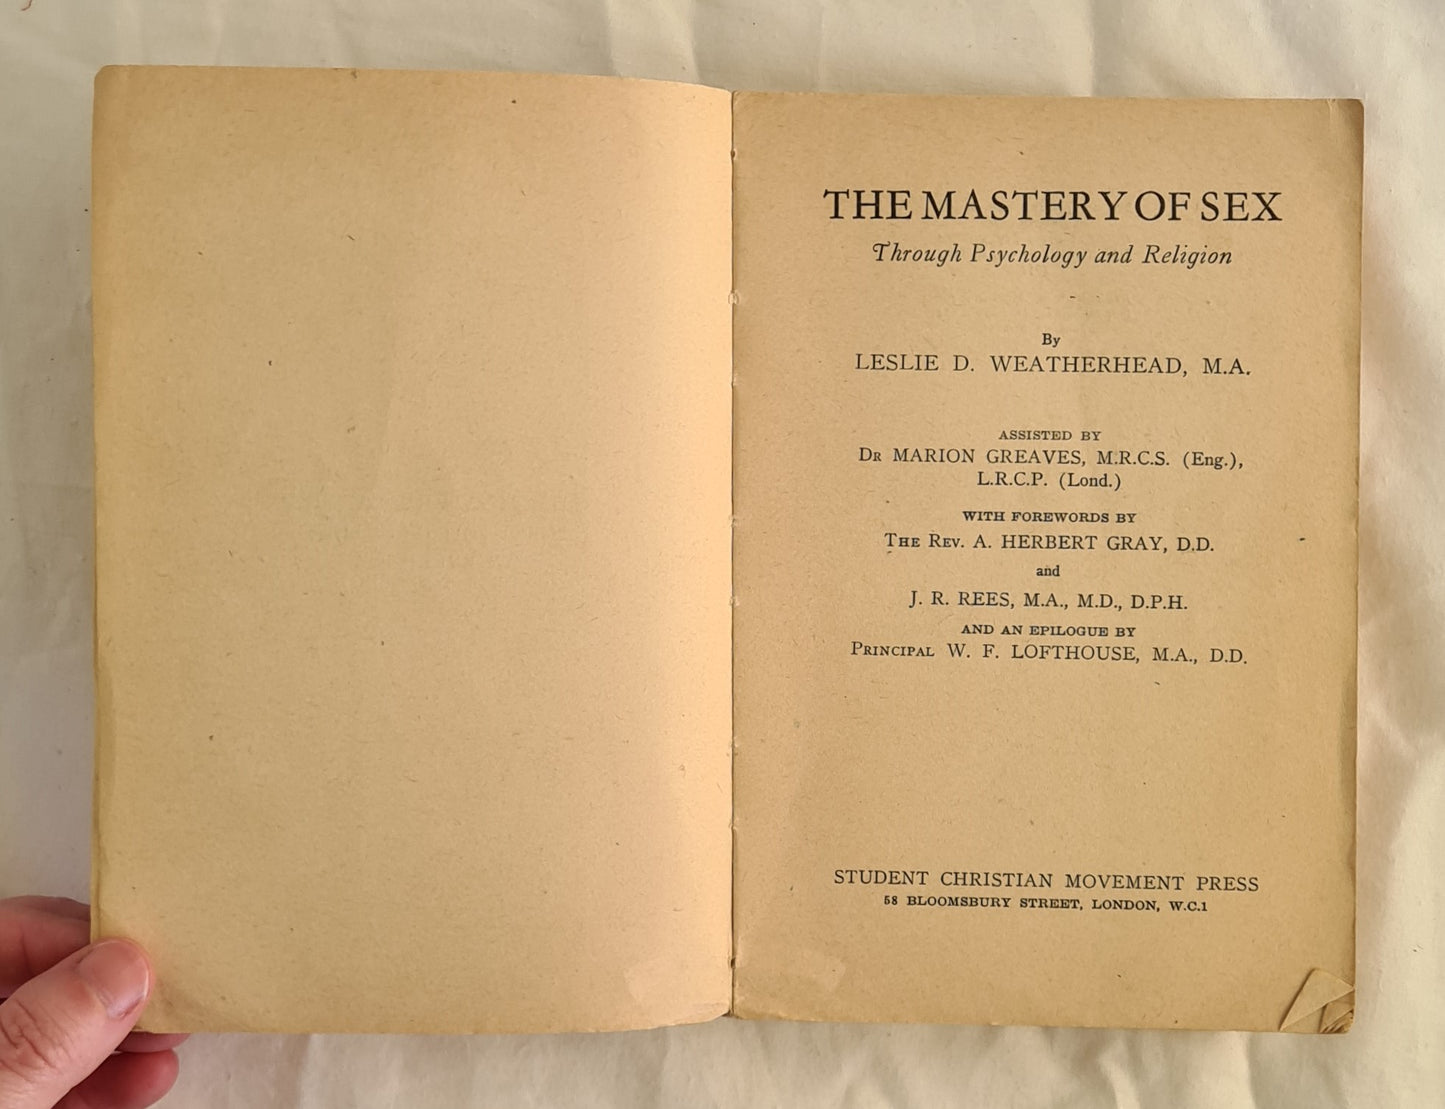 The Mastery of Sex by Leslie D. Weatherhead